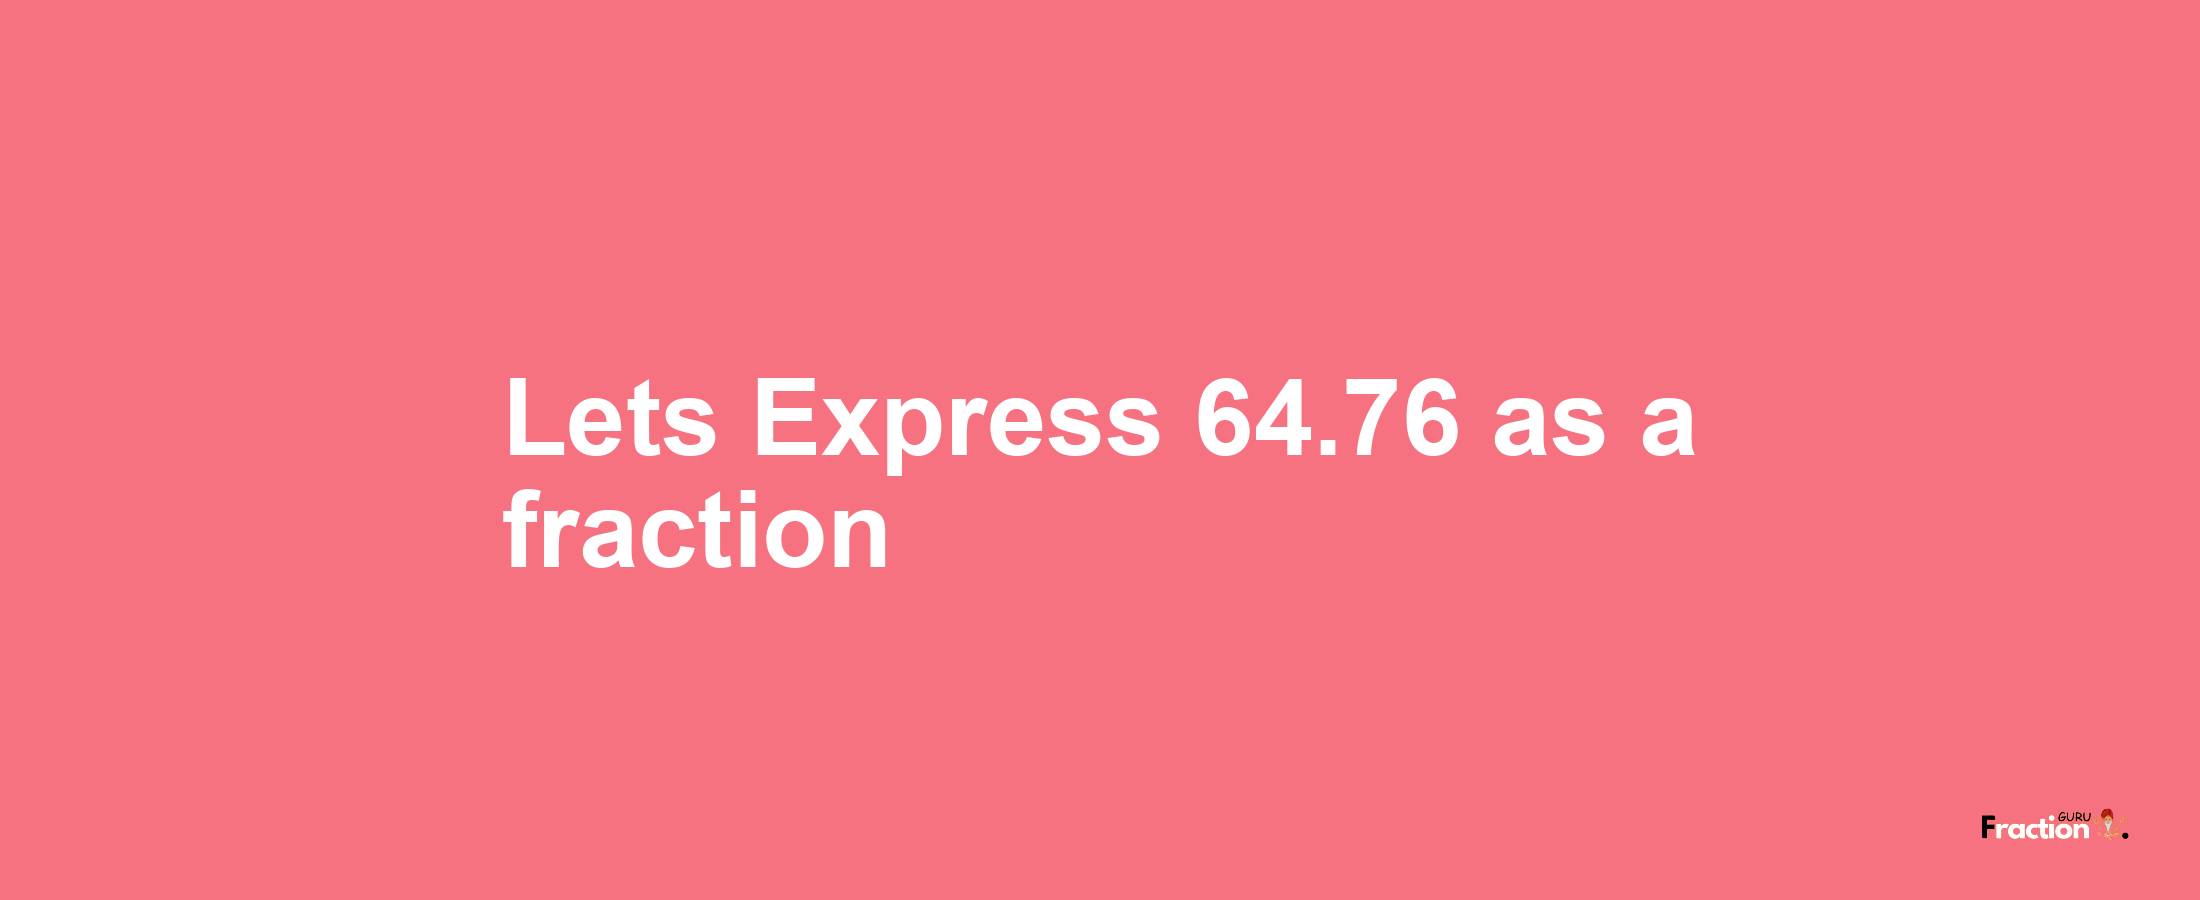 Lets Express 64.76 as afraction